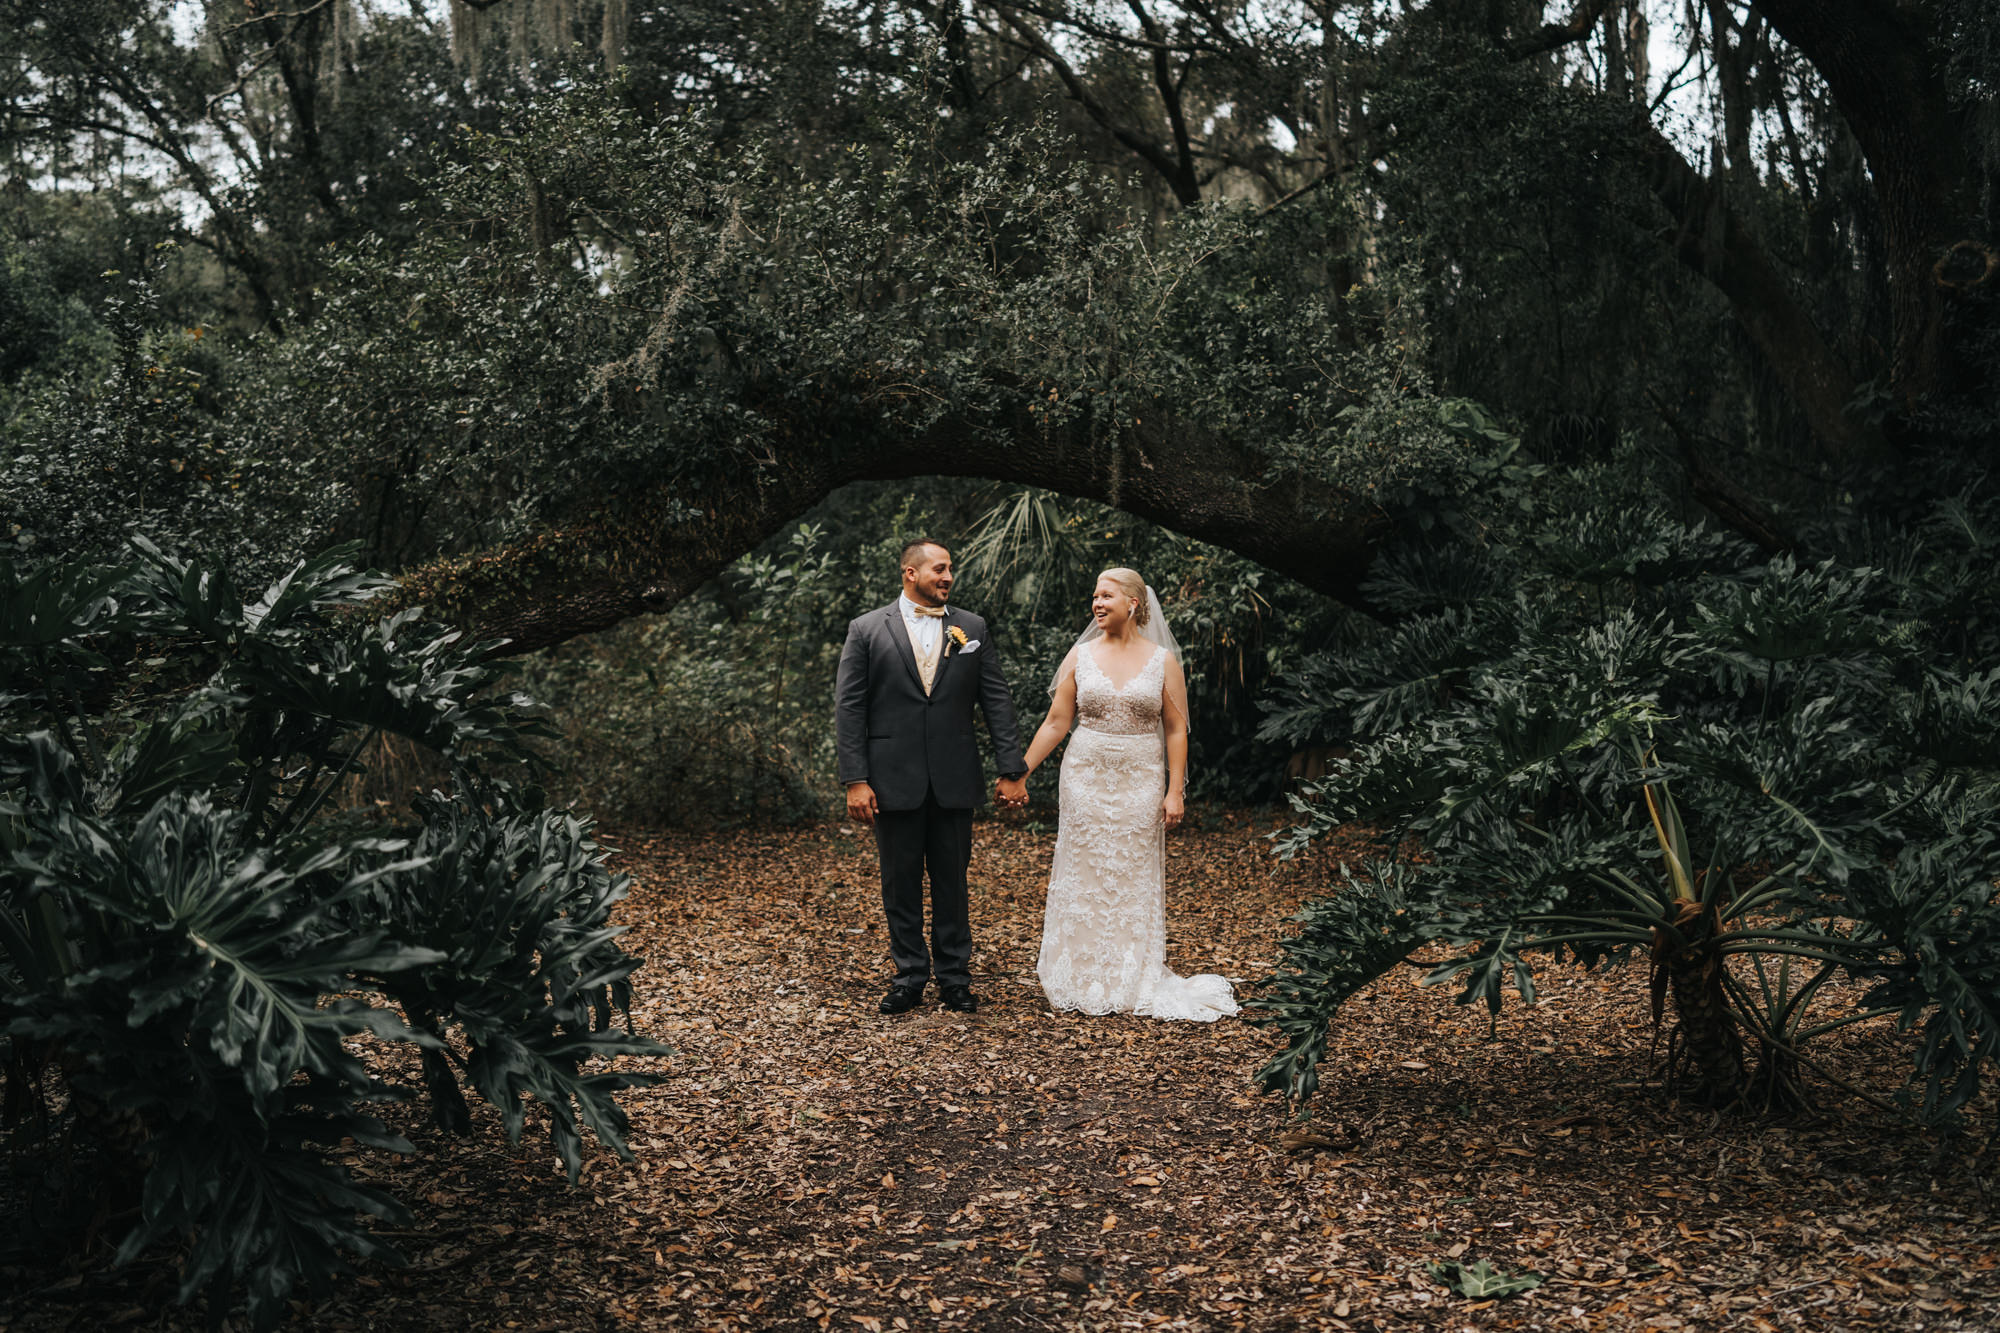 Bride and Groom Outdoor Portrait in Dover Florida with Oak Trees and Greenery | V Neck Champagne Lace Bridal Gown Wedding Dress from Sarasota Dress Shop Truly Forever Bridal | Groom in Classic Charcoal Grey Gray Suit Tux with Sunflower Boutonniere